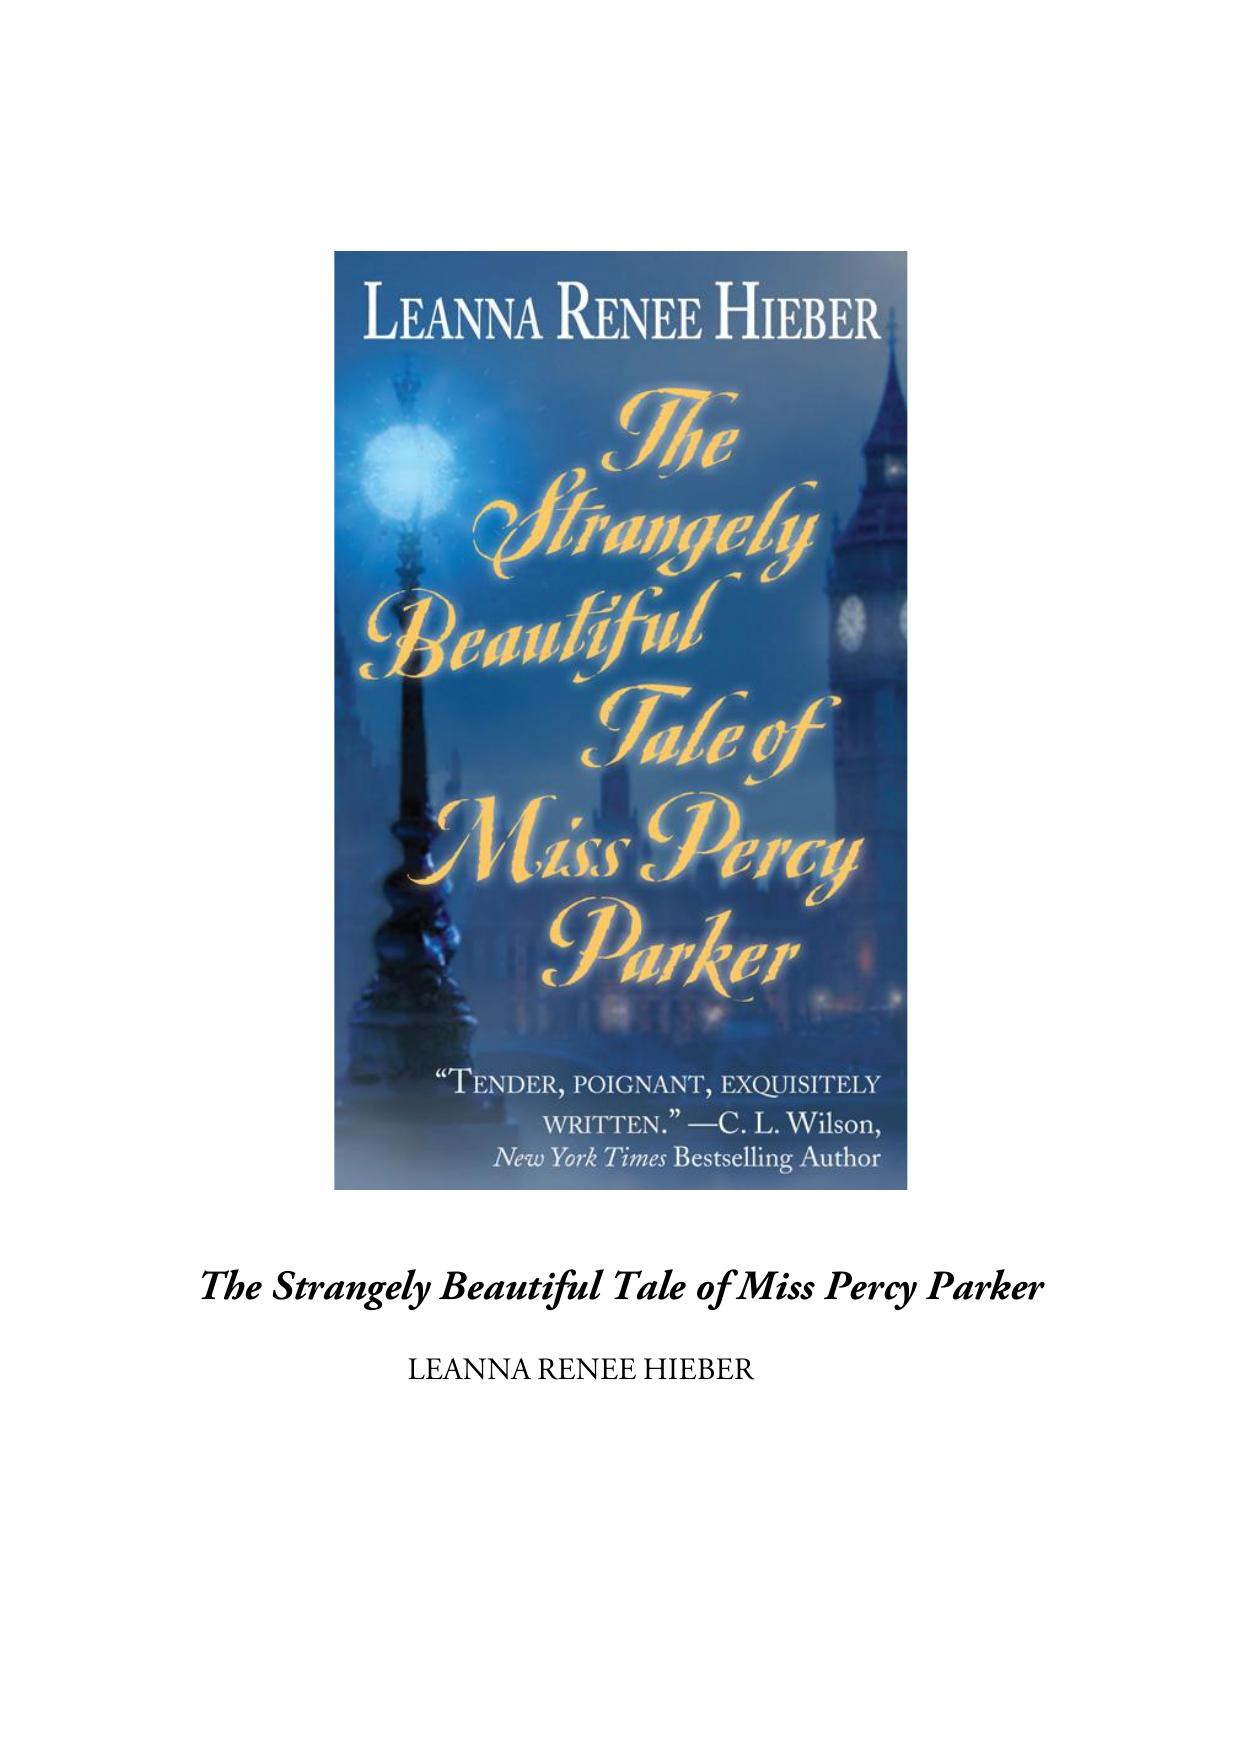 The Strangely Beautiful Tale of Miss Percy Parker by Leanna Renee Hieber